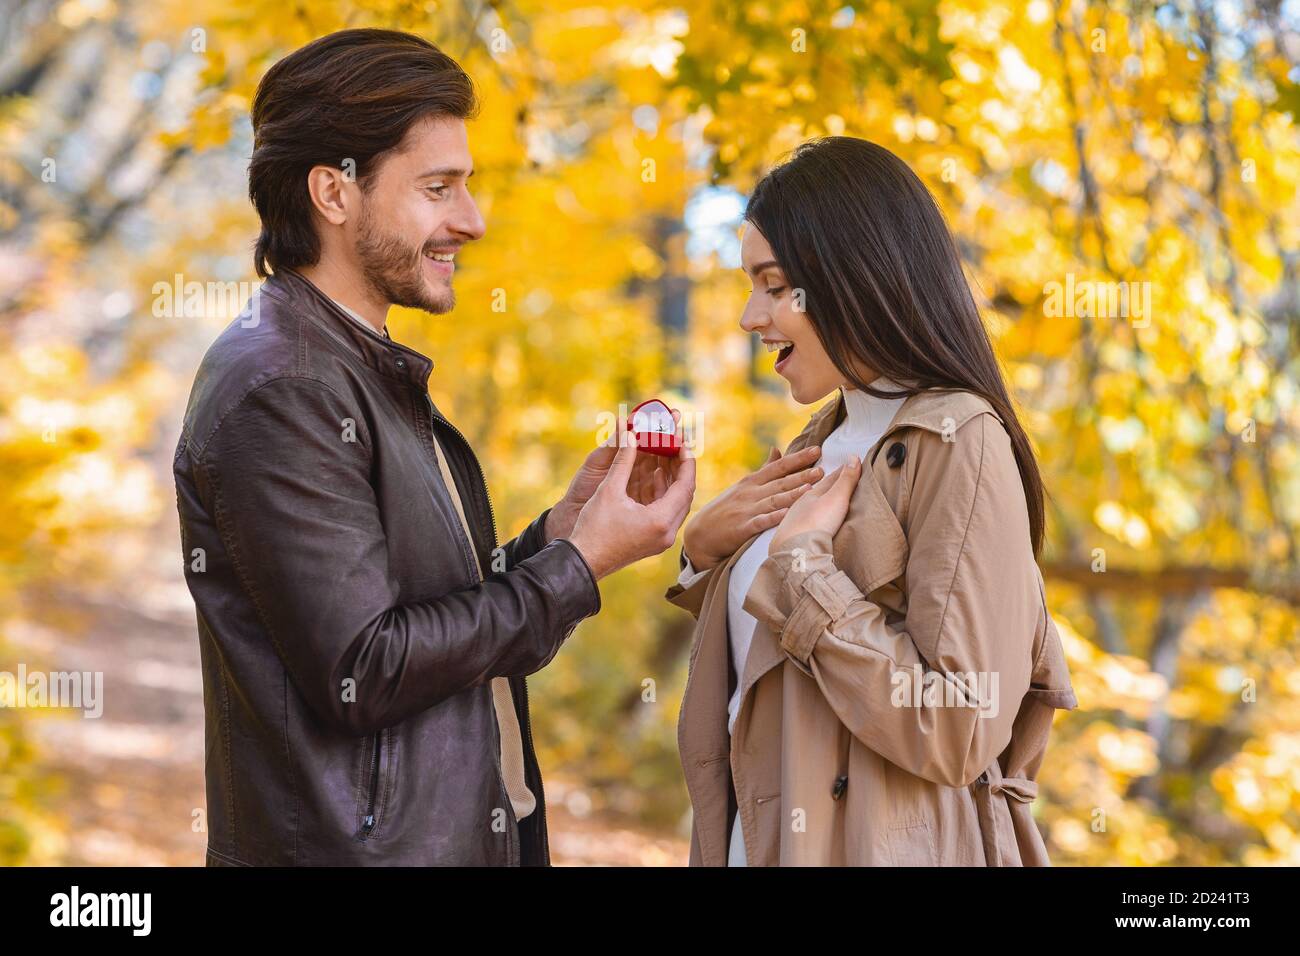 Romantic man in love making propose to his girlfriend Stock Photo